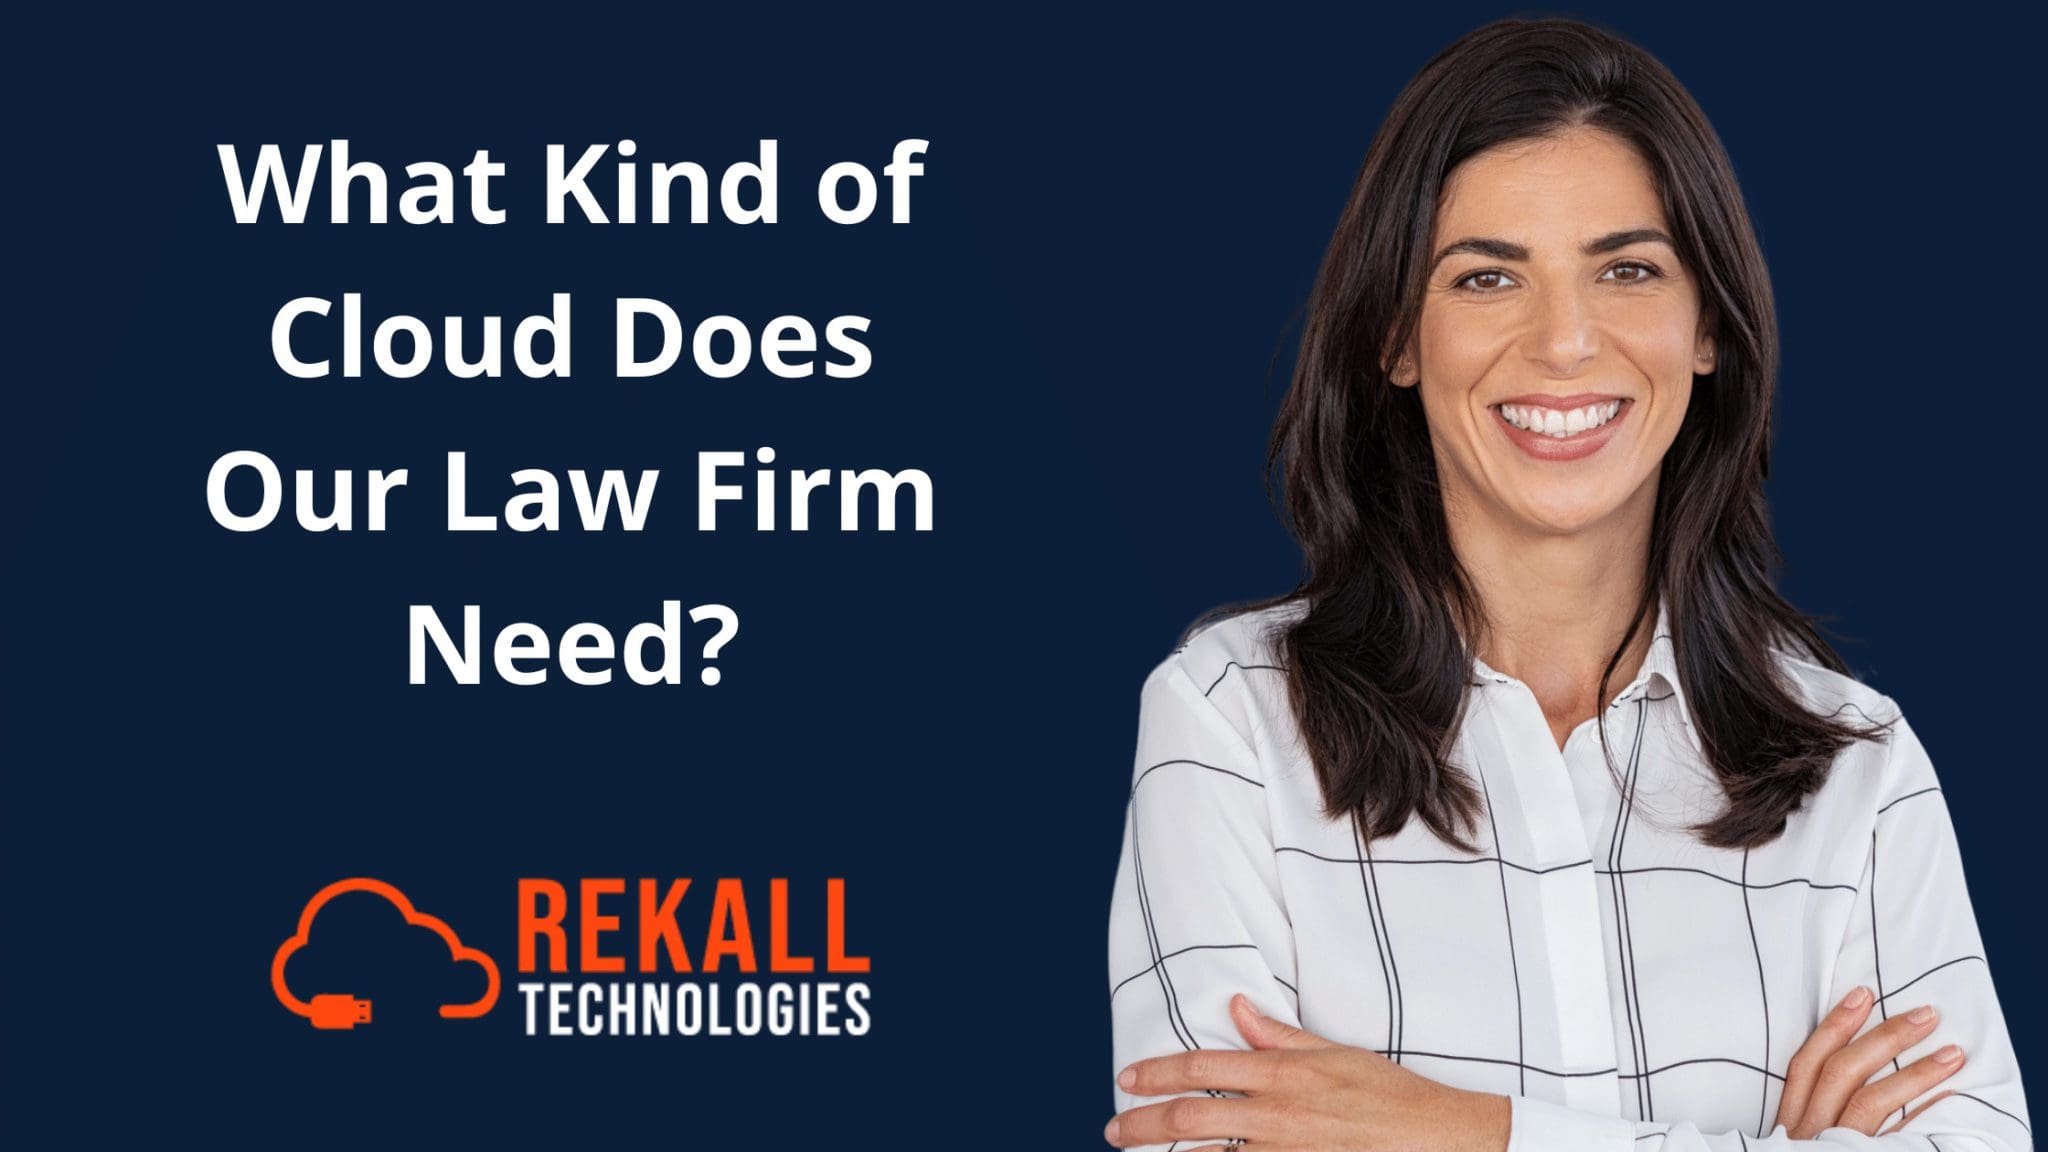 What Kind of Cloud Technologies Does Our Law Firm Need?